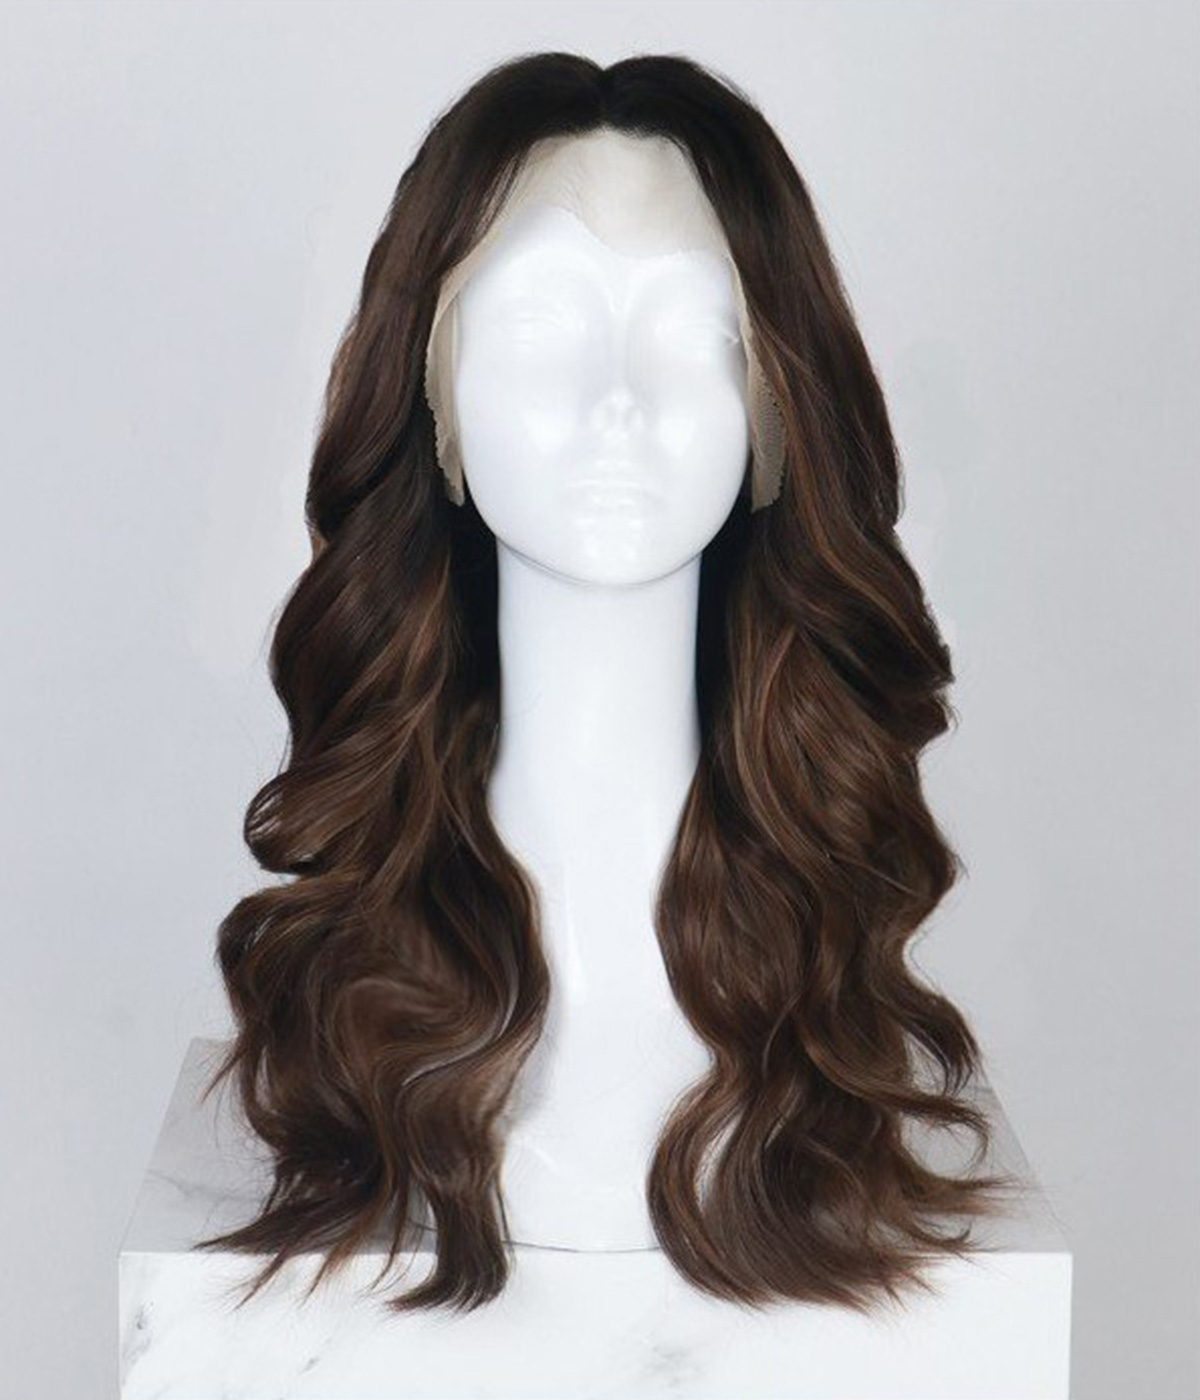 13"x3" Brunette Balayage Wavy Synthetic Lace Front Wig